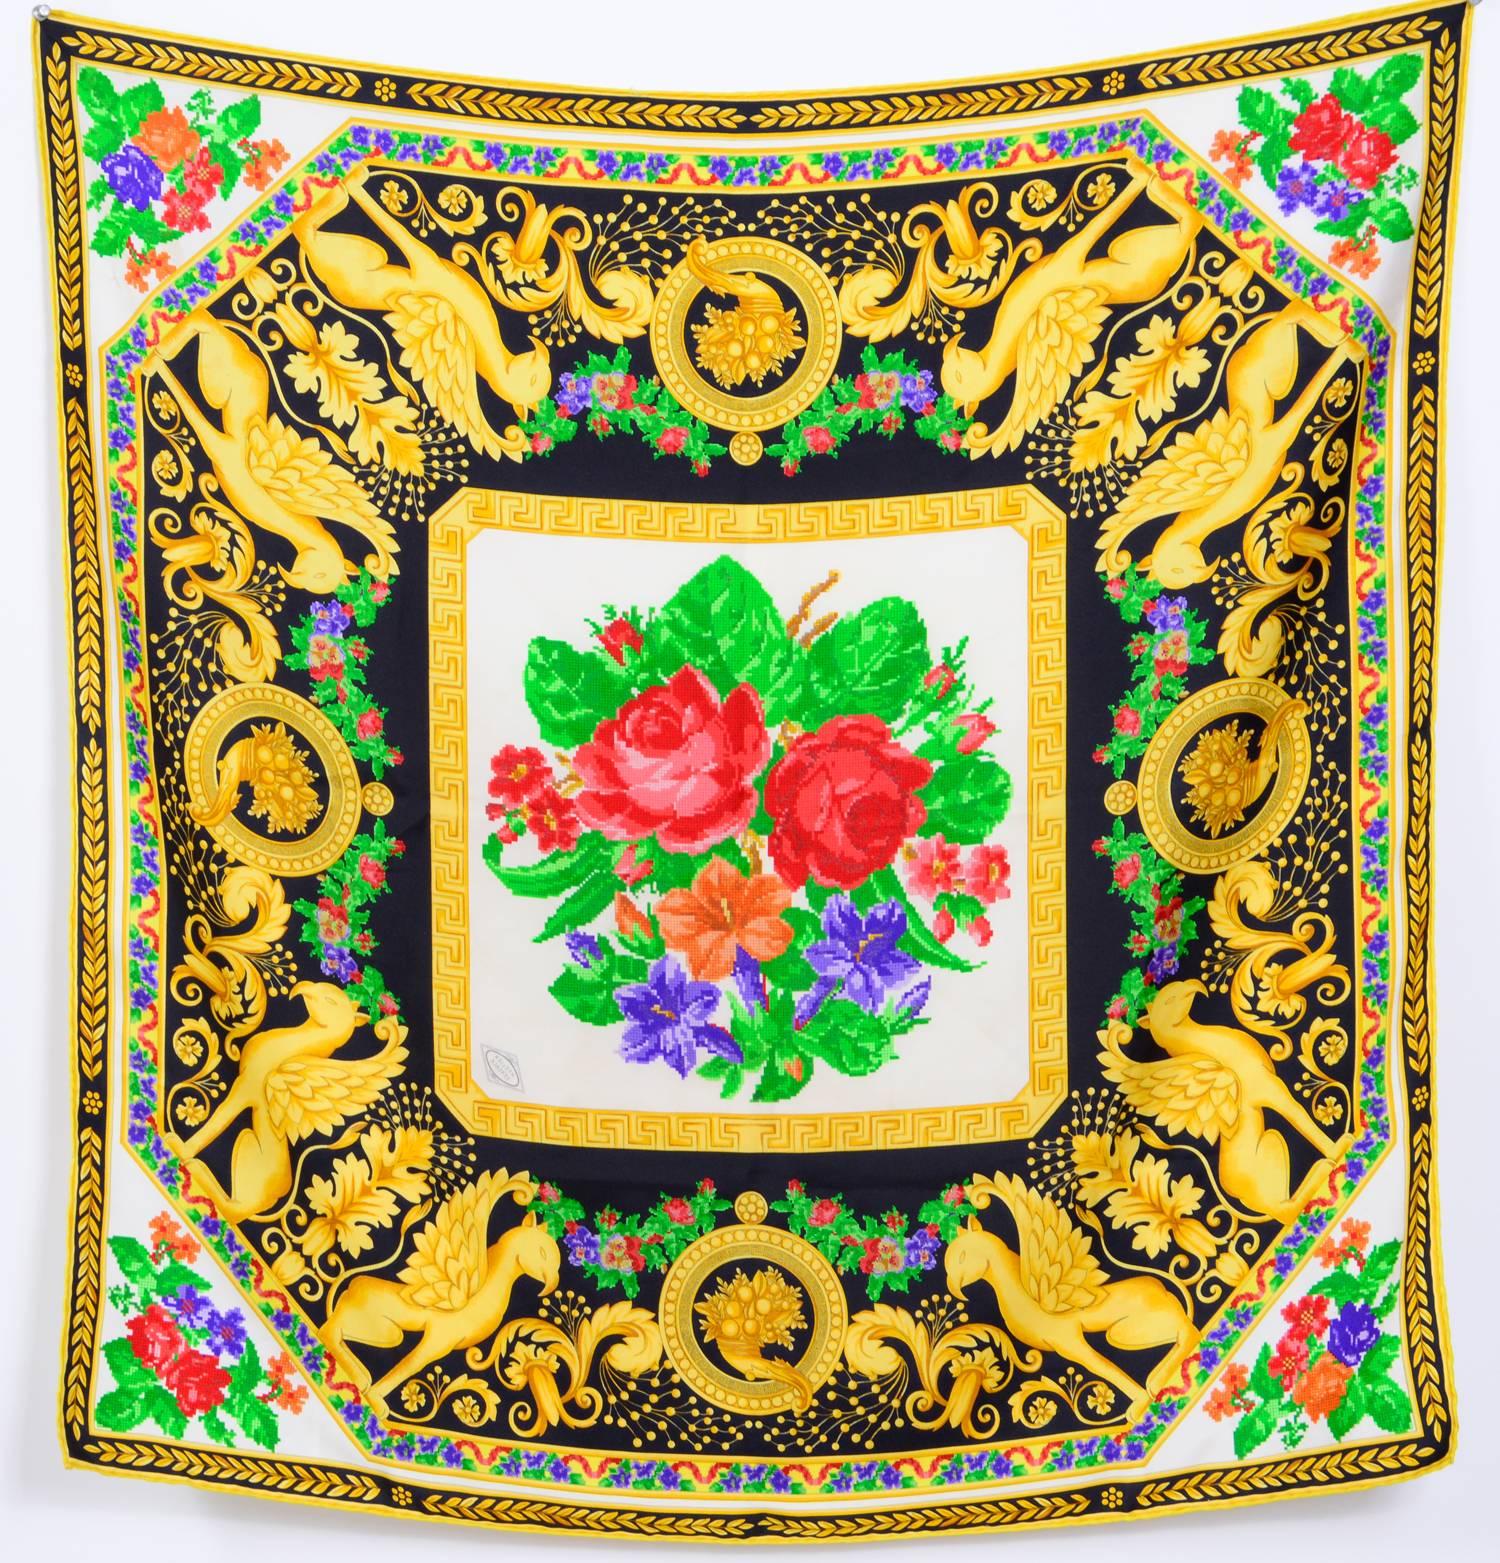 Beautiful scarf by Versace Atelier - Hand rolled edges - 100% silk - Signed Versace Atelier - Baroque Print Frame - Needlepoint embroidery flower print 
Measurements:  35inch/89cm -by 35inch/89cm
Excellent condition